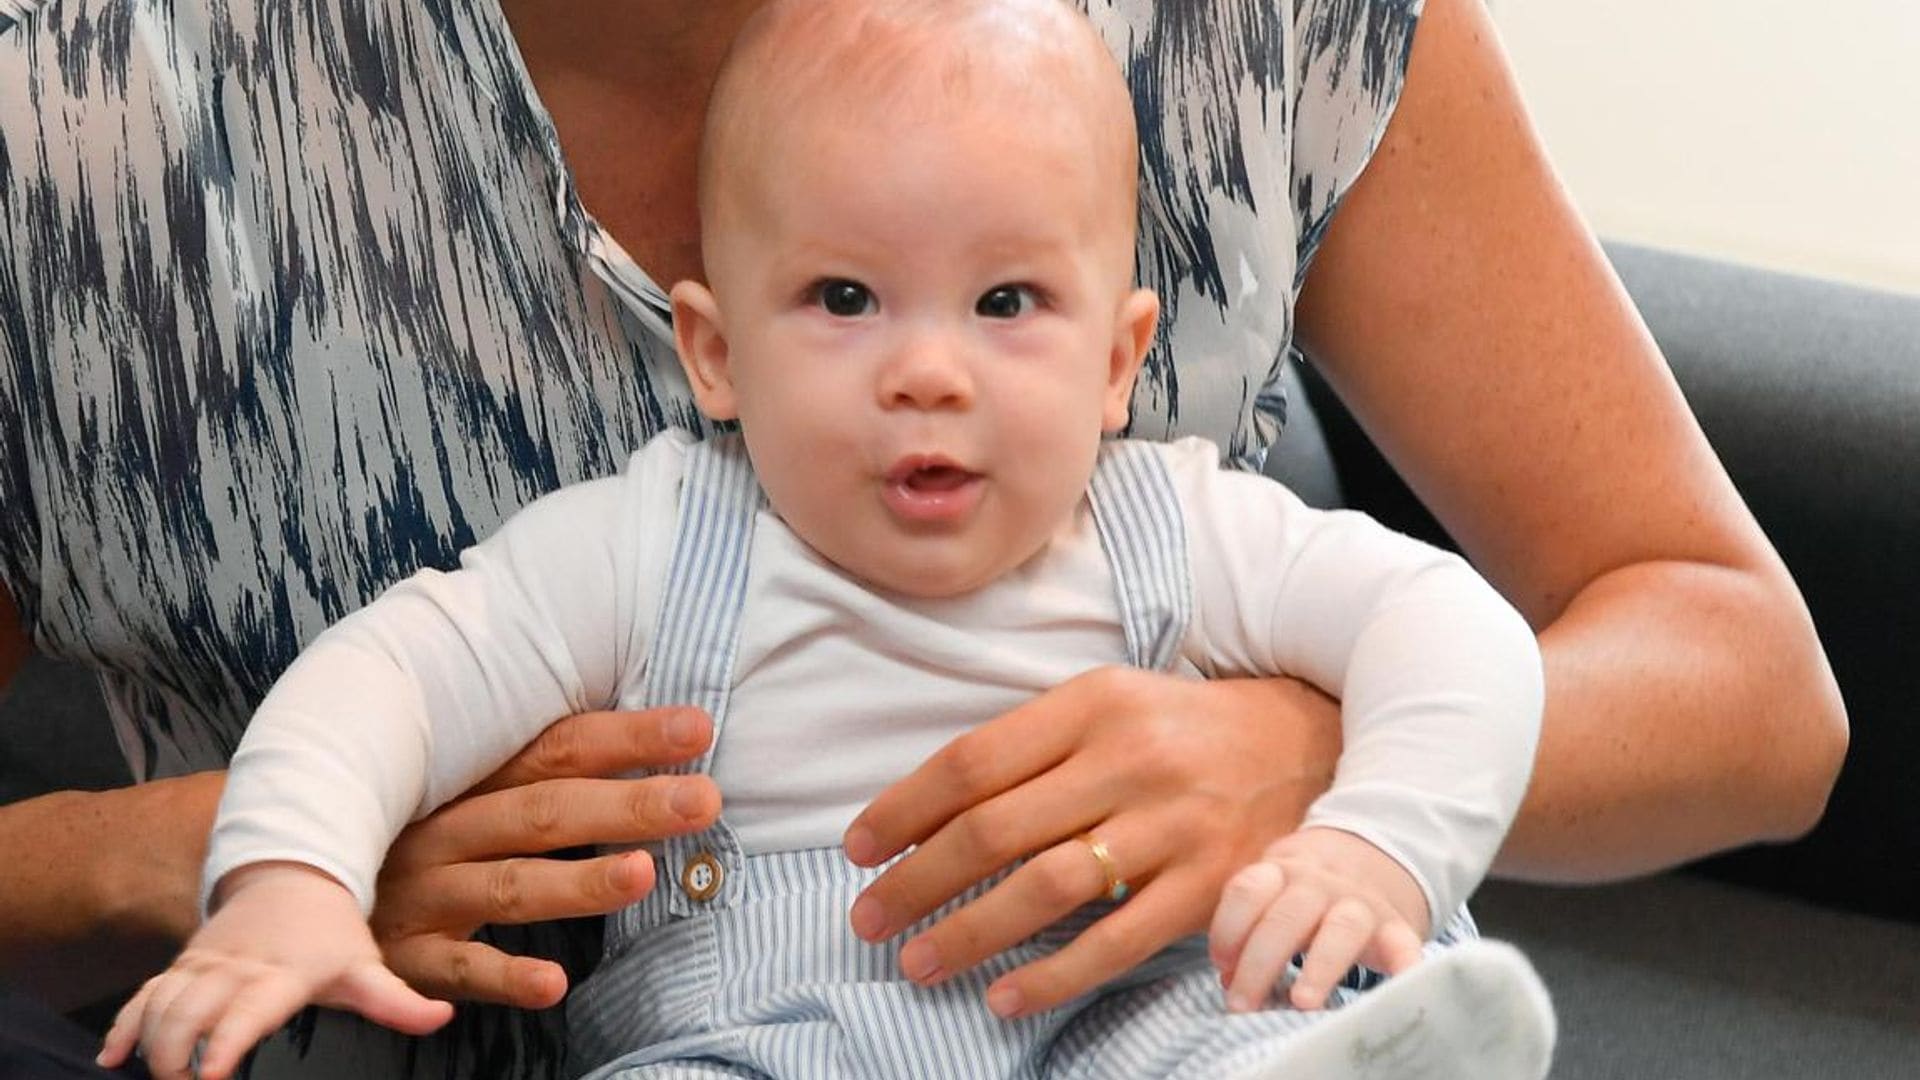 Archie Harrison attended his first playgroup session, Meghan Markle revealed